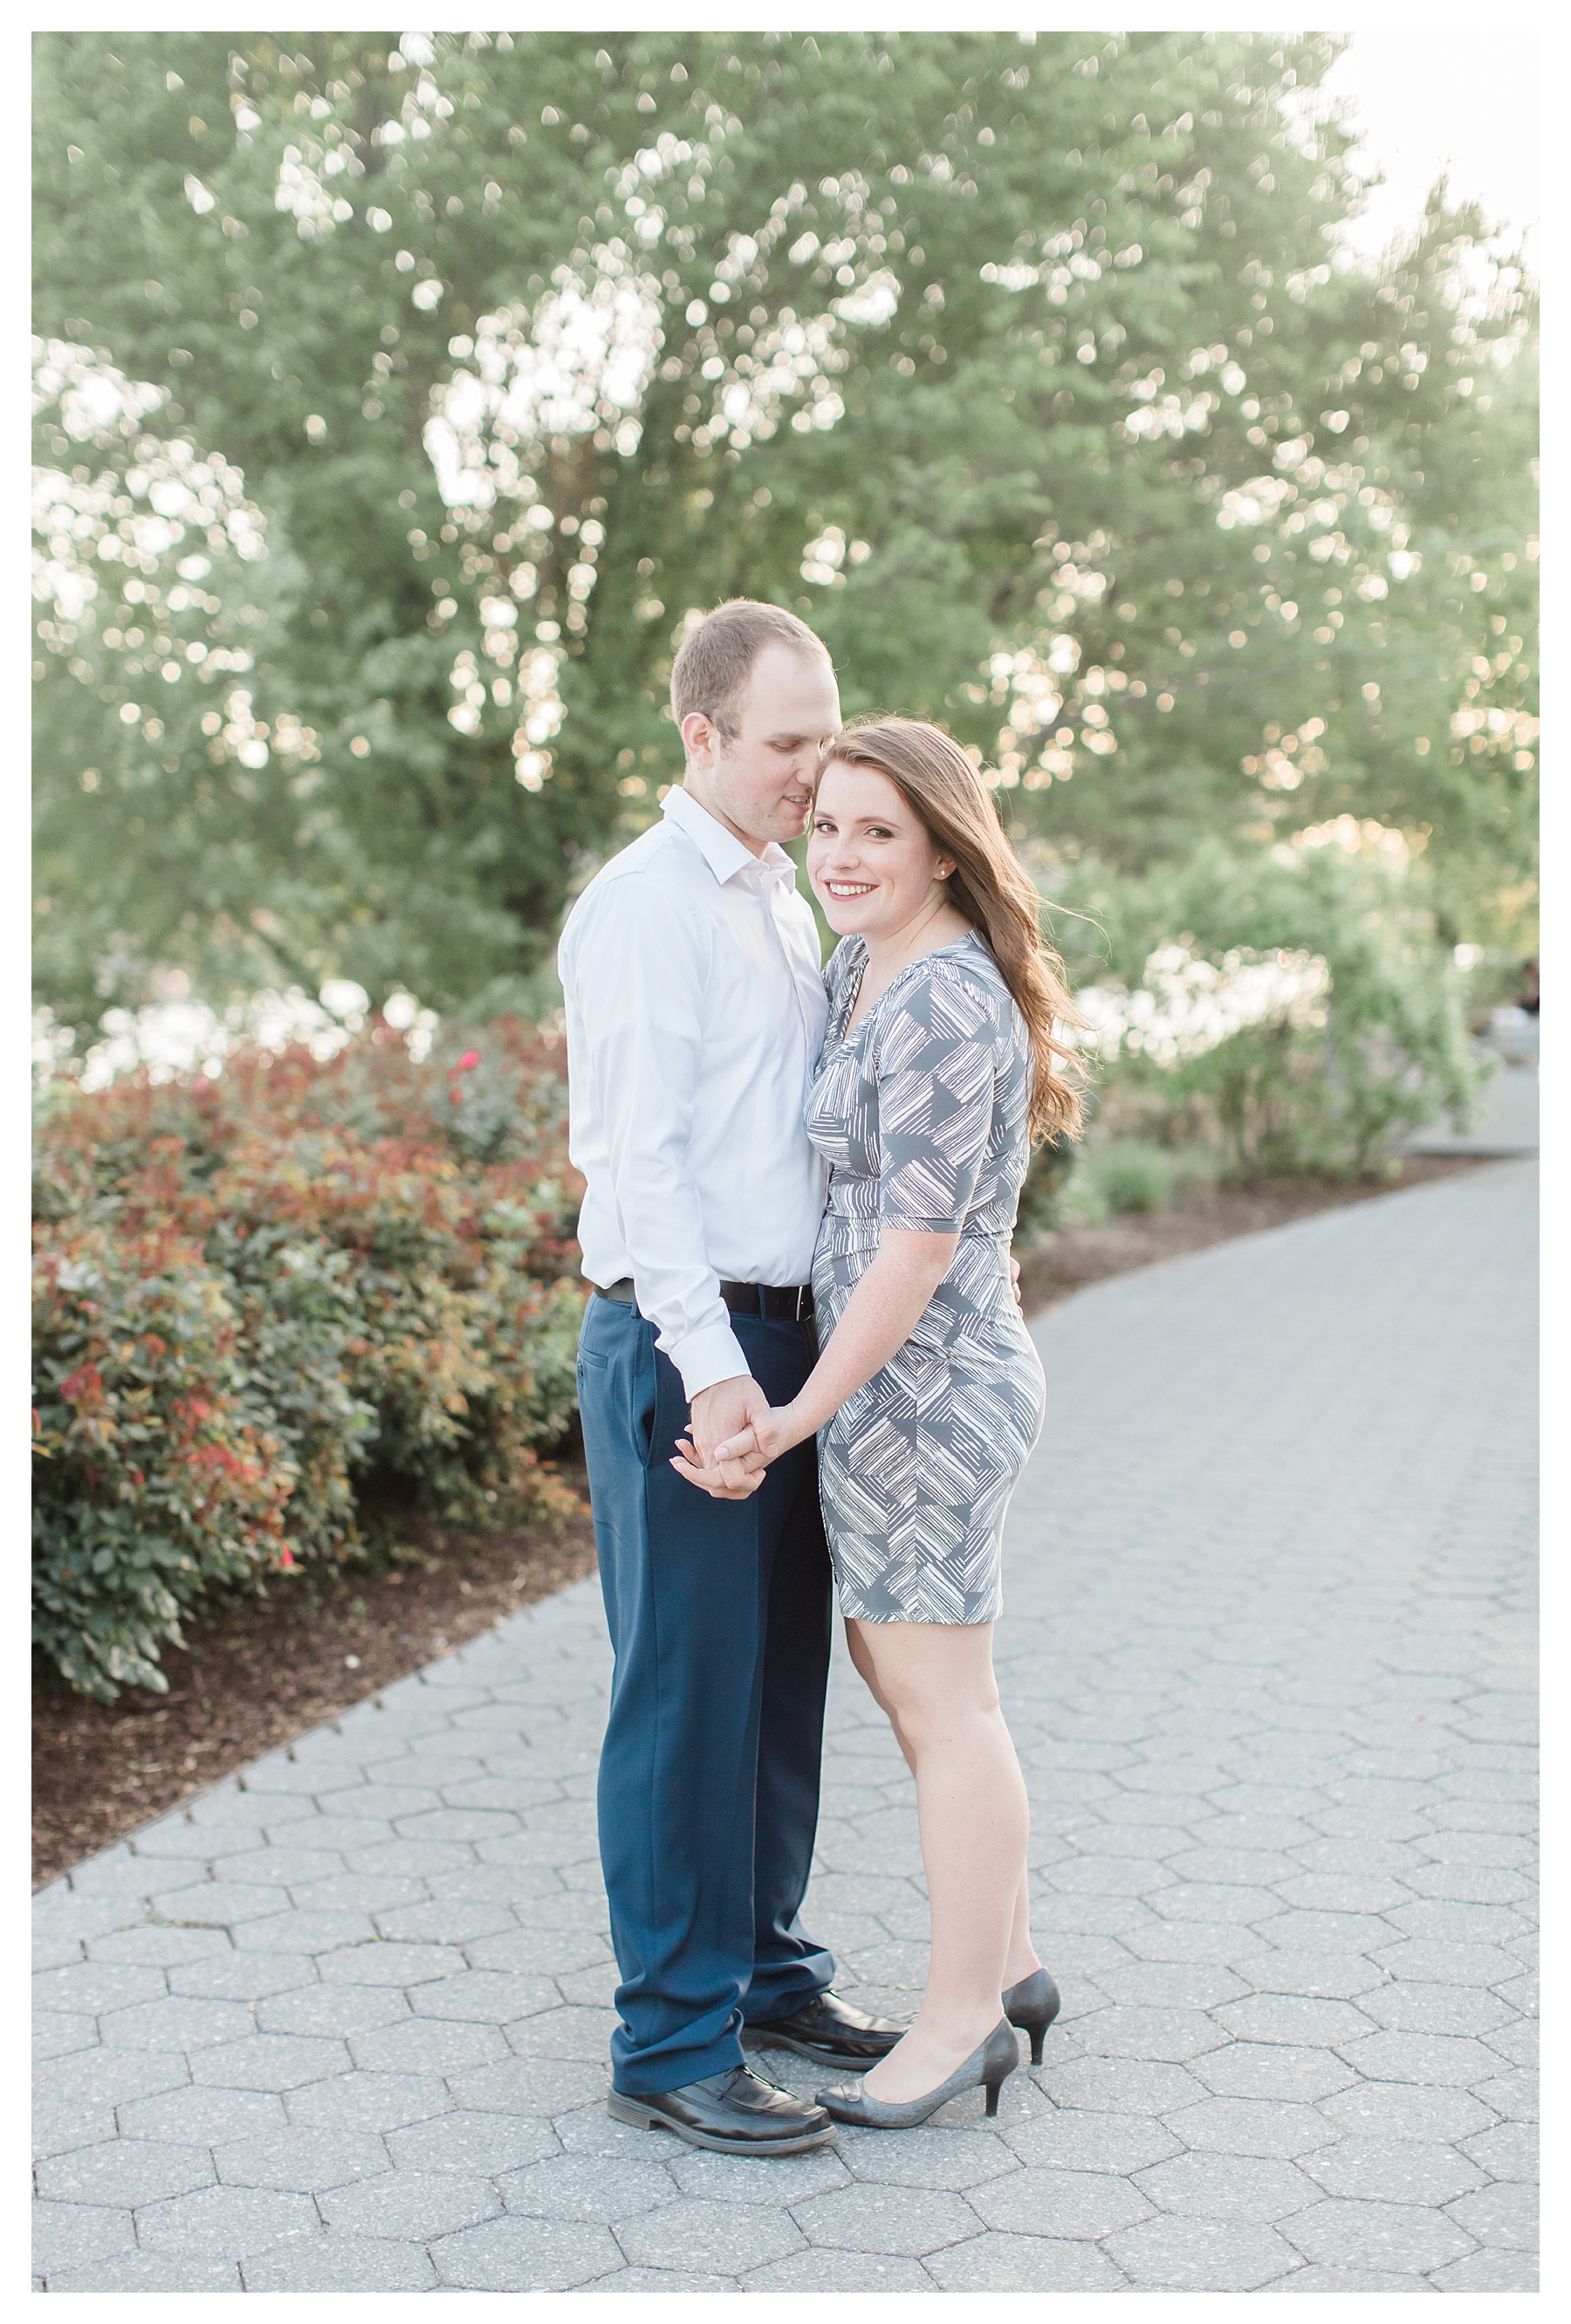 Candice Adelle Photography DC Wedding Photographer DC Georgetown Engagement_1568.jpg